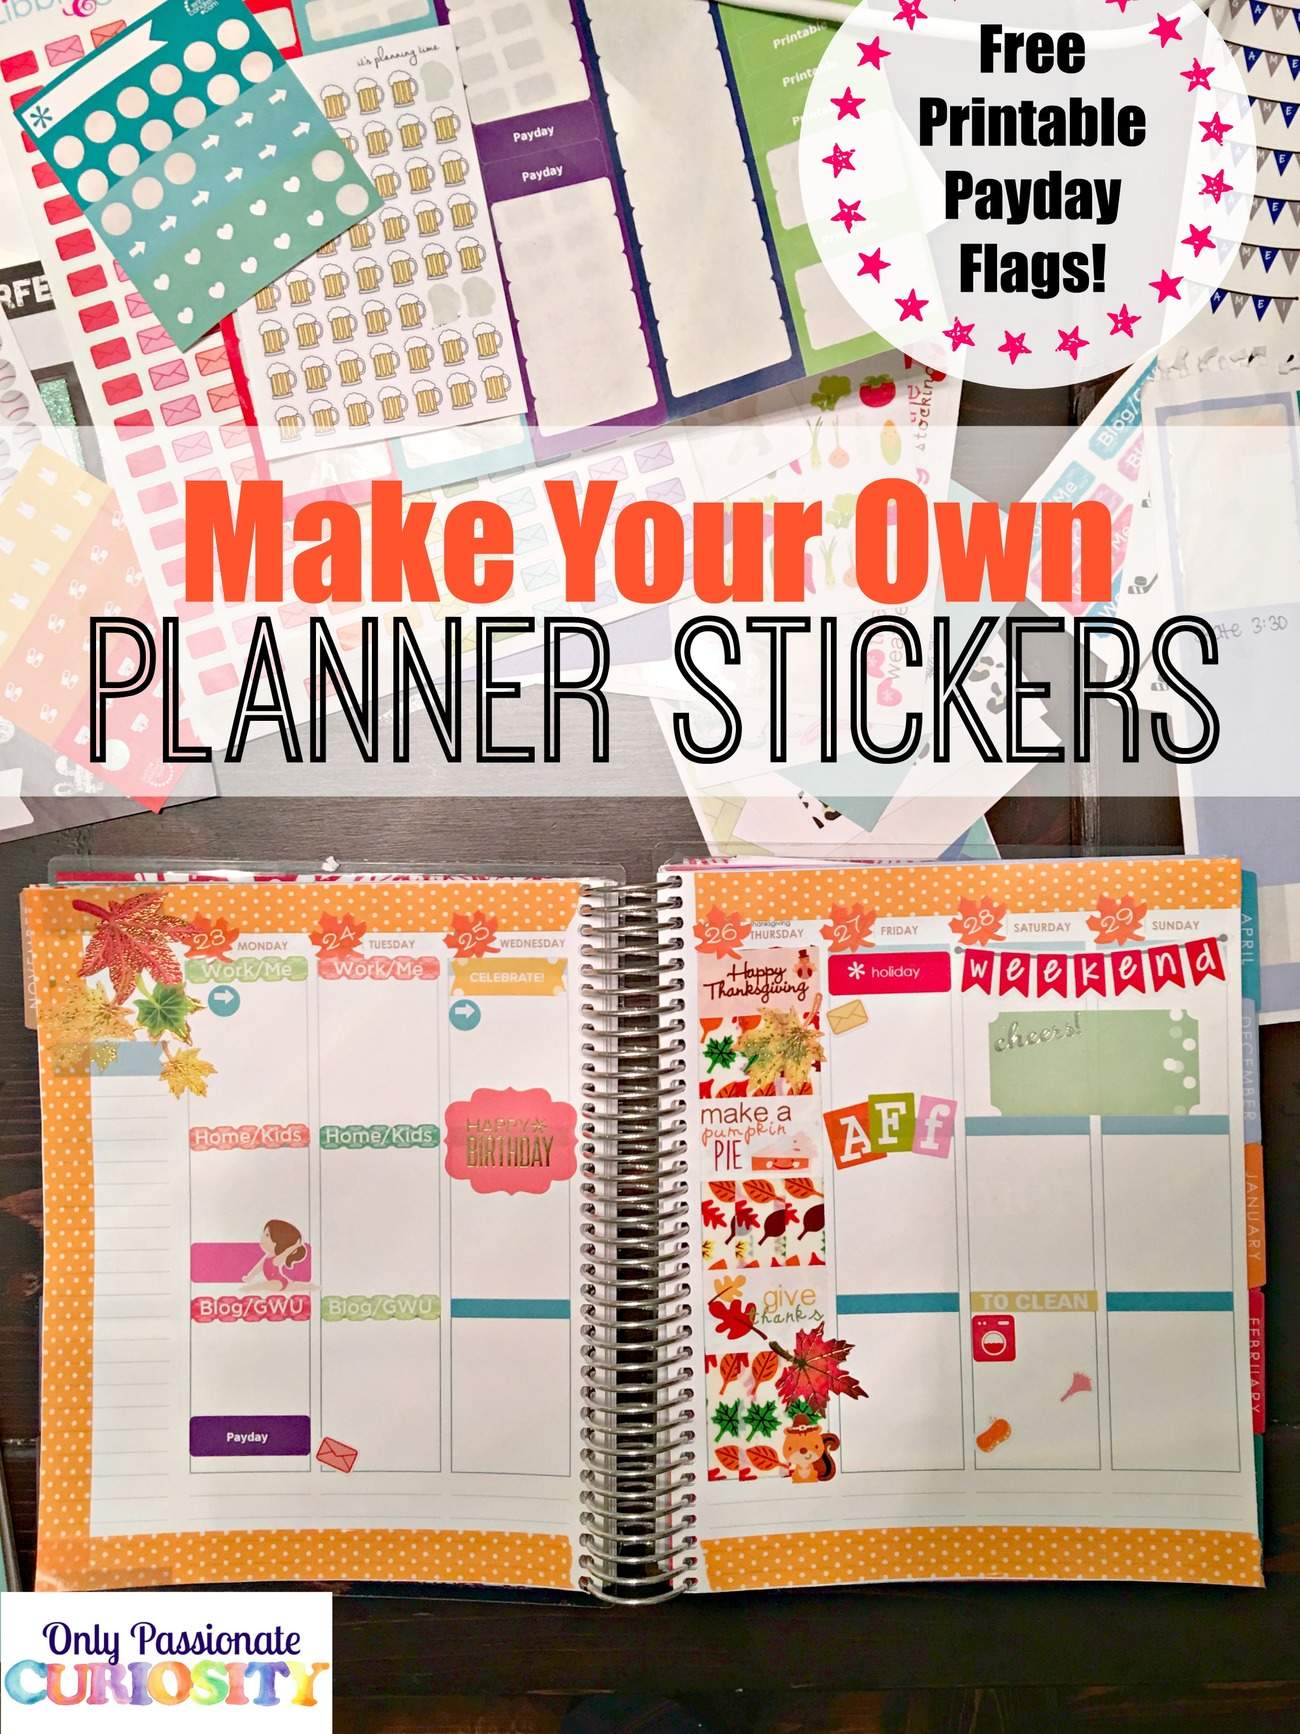 How to Make Planner Stickers with a Cricut